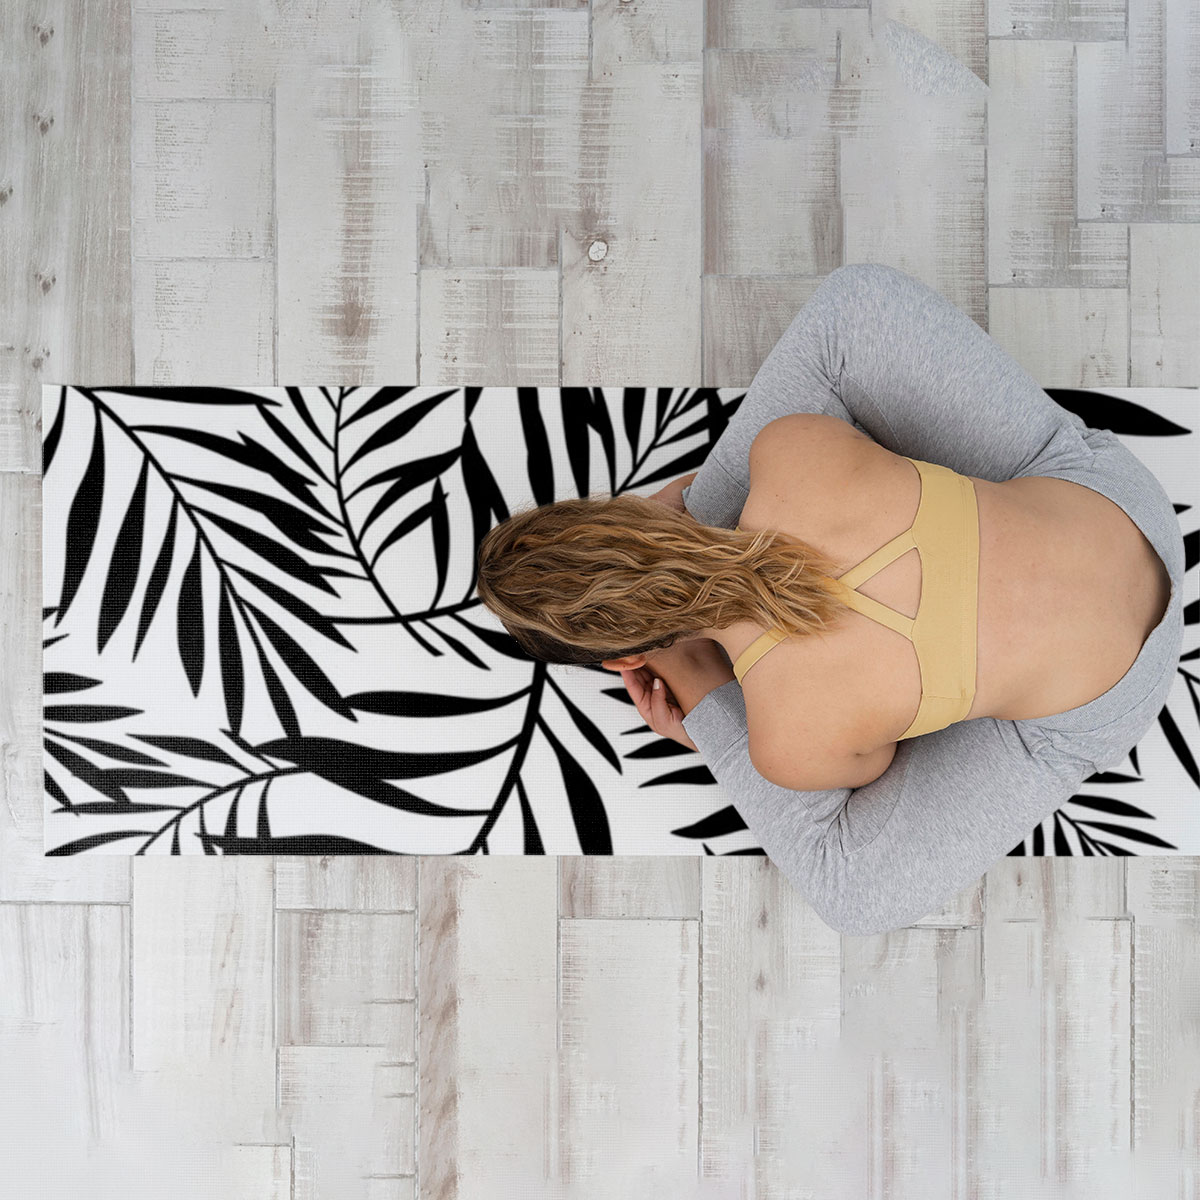 Black And White With Palm Leaves Yoga Mat